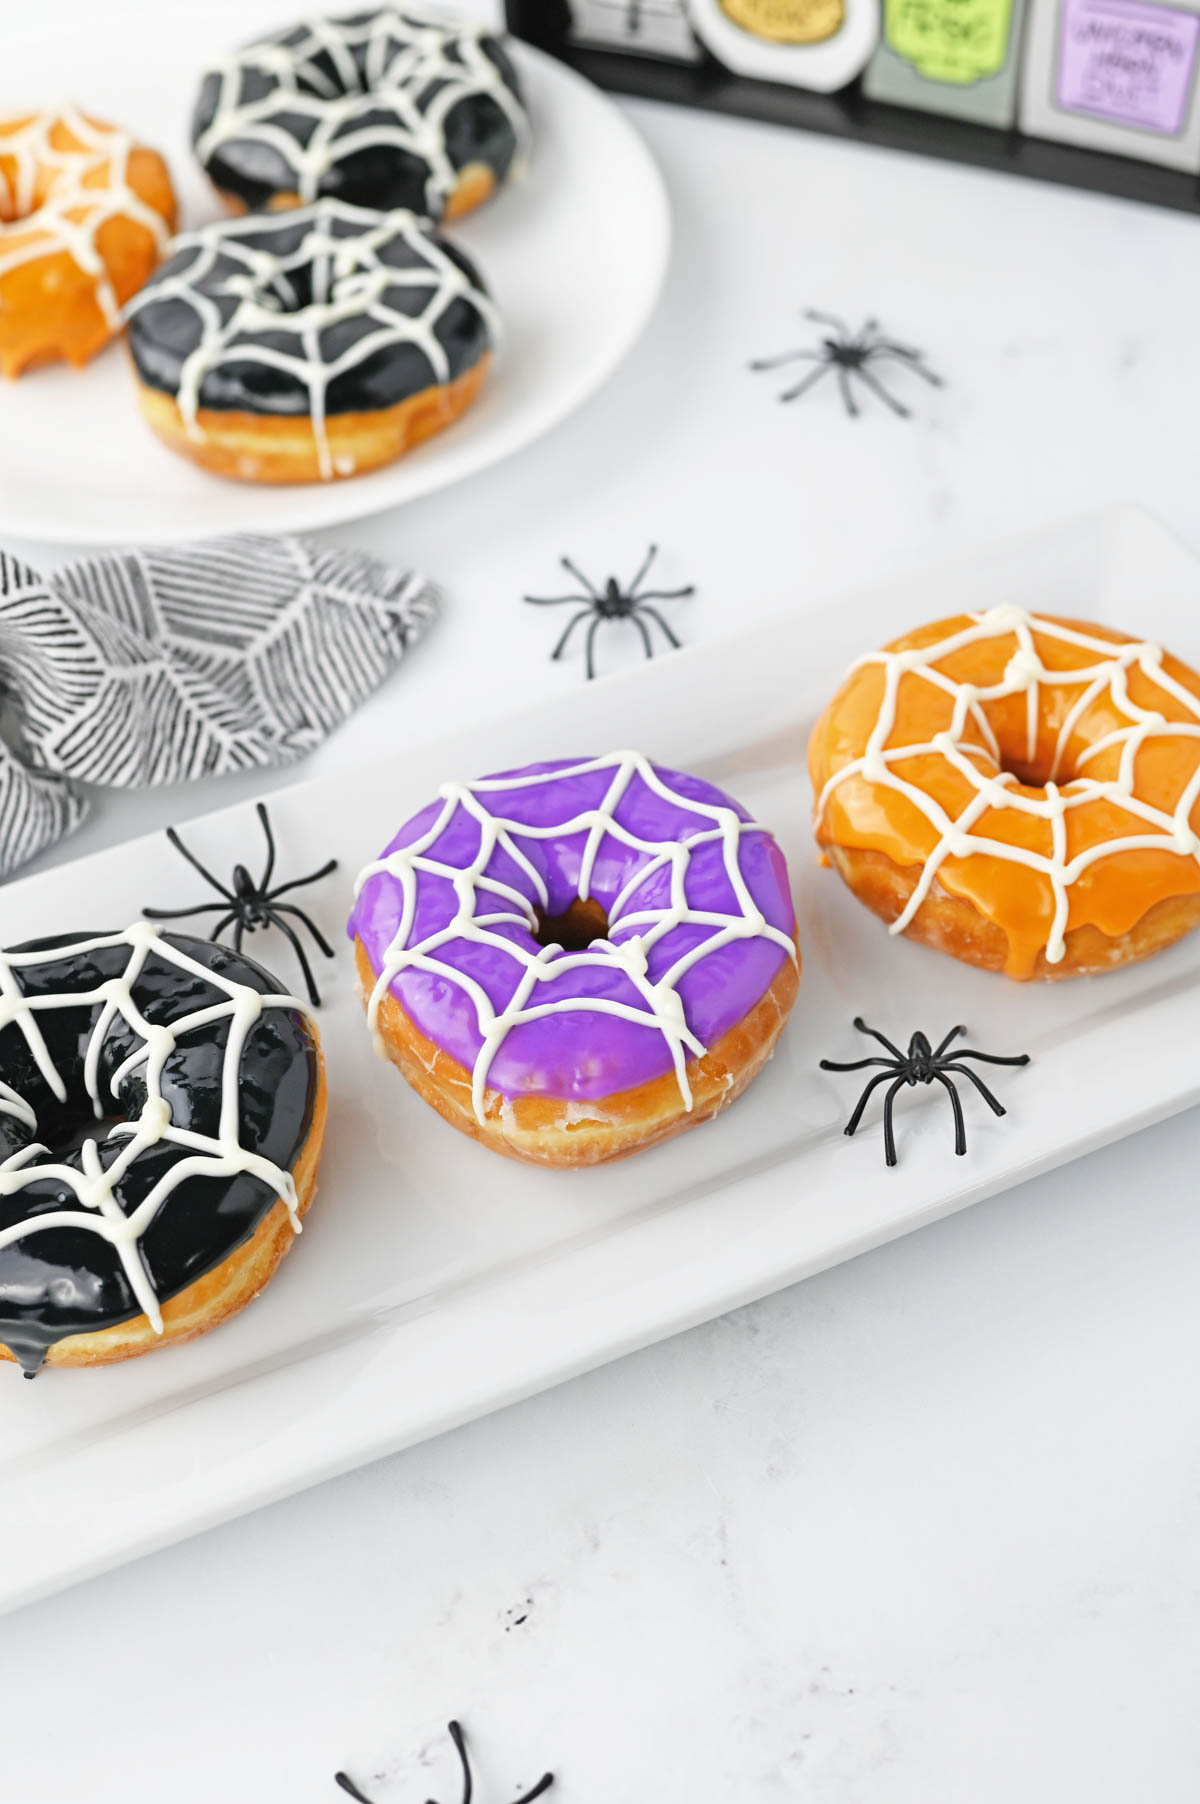 Spiderweb donuts on white plate with plastic spiders